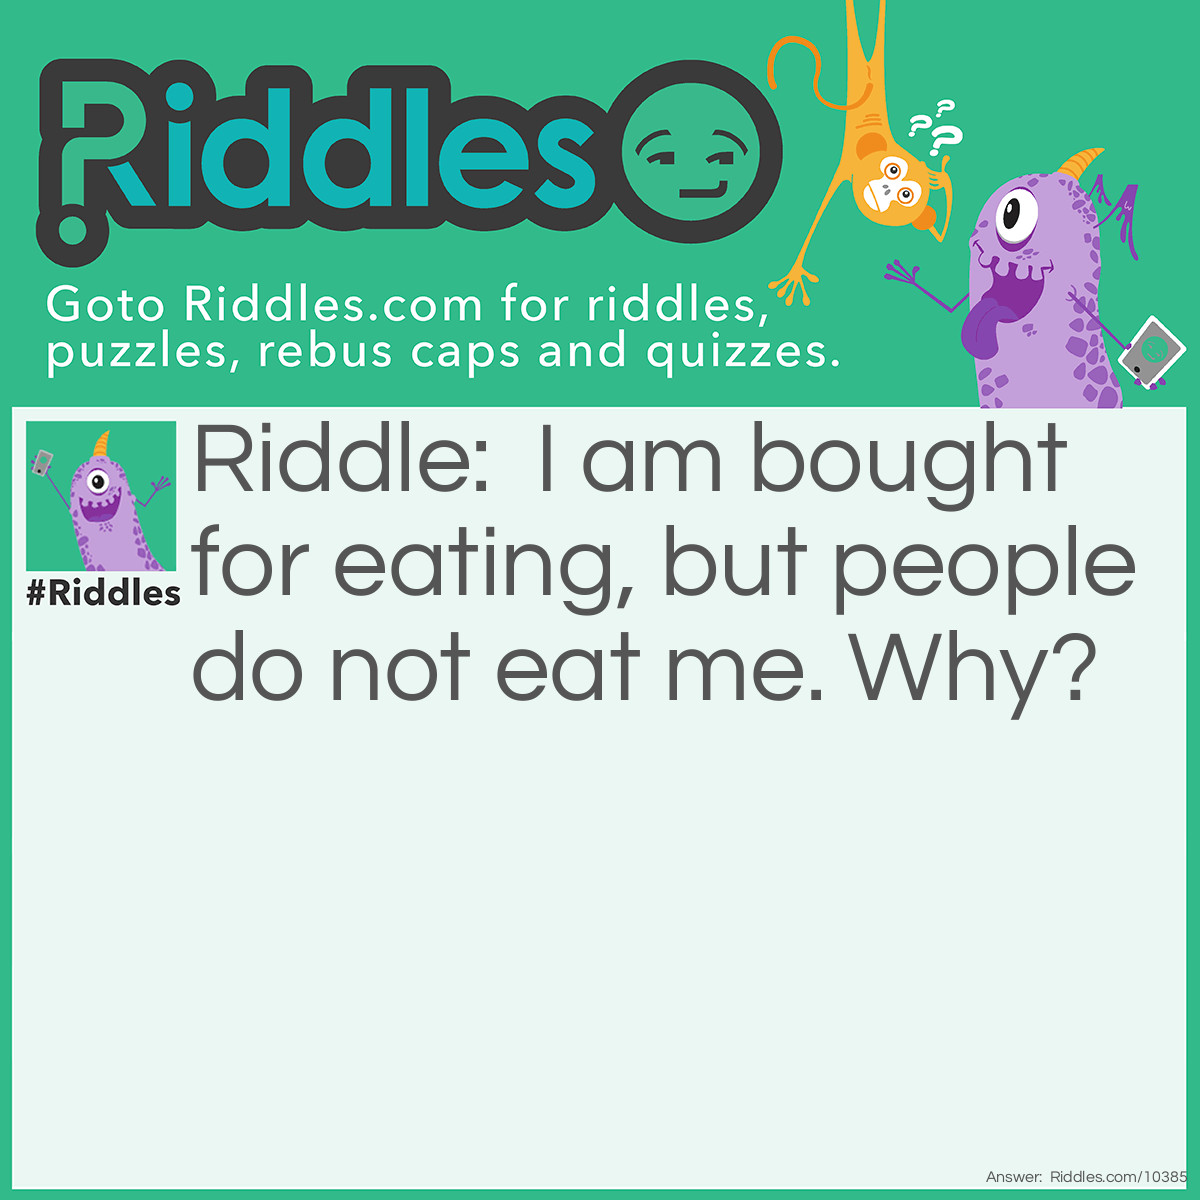 Riddle: I am bought for eating, but people do not eat me. Why? Answer: Because I am a plate.